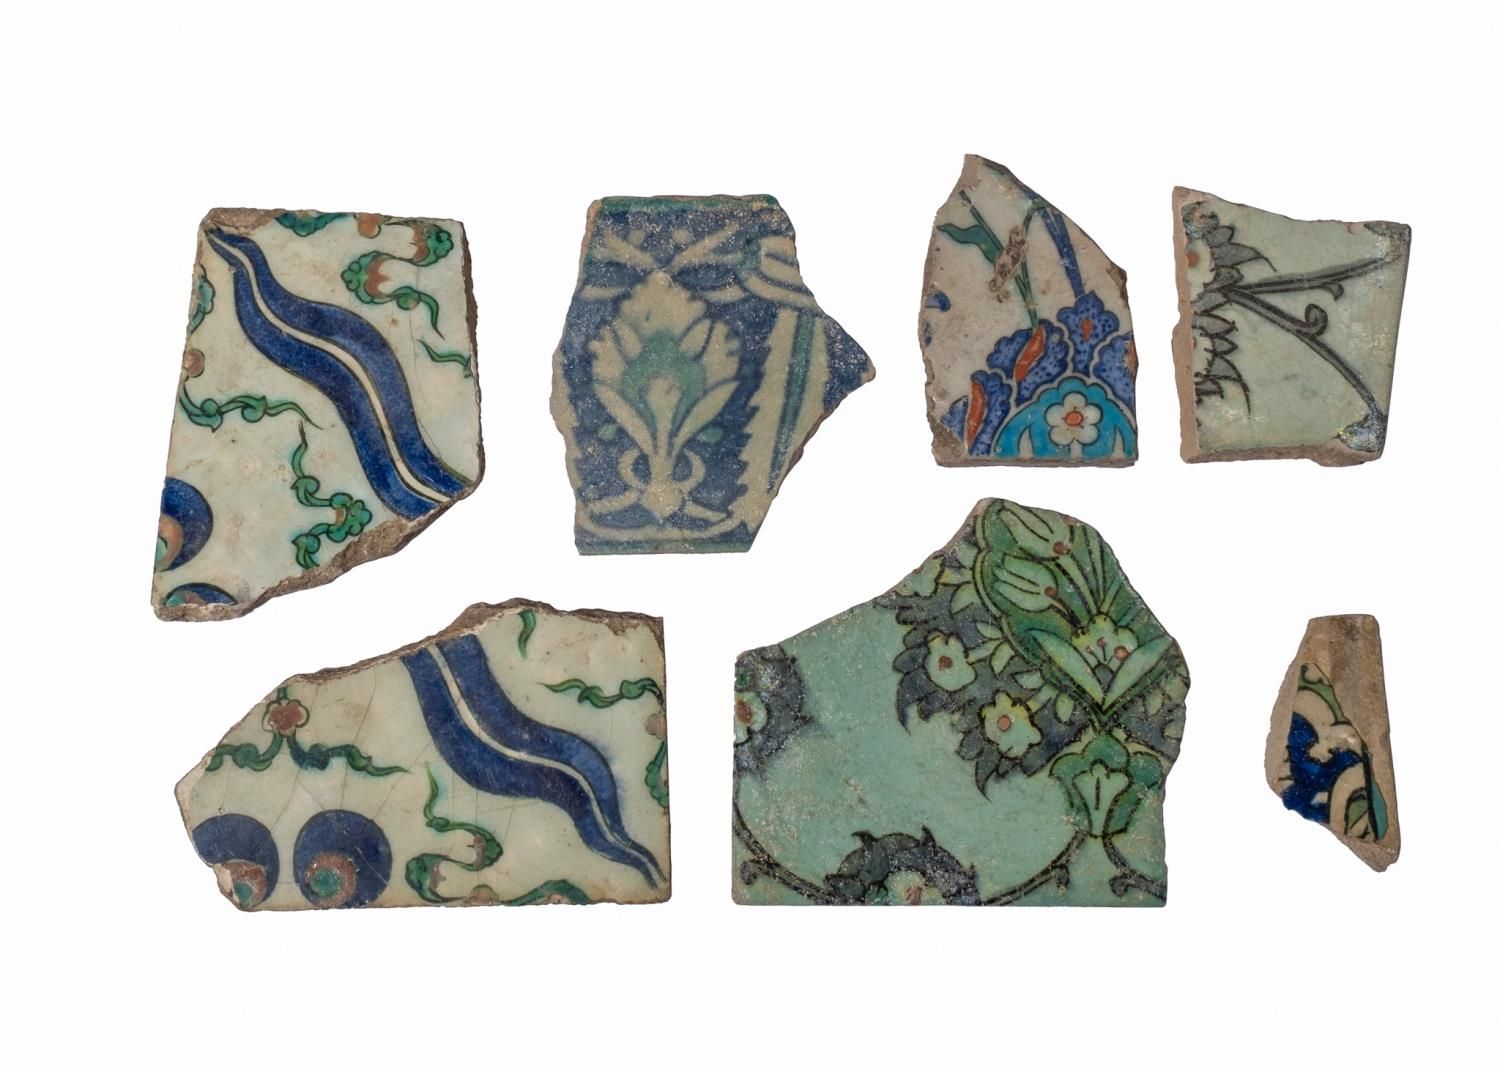 Null AN ASSORTMENT OF EARLY IZNIK TILE FRAGMENTS, 16TH CENTURY
 
 Length of larg&hellip;